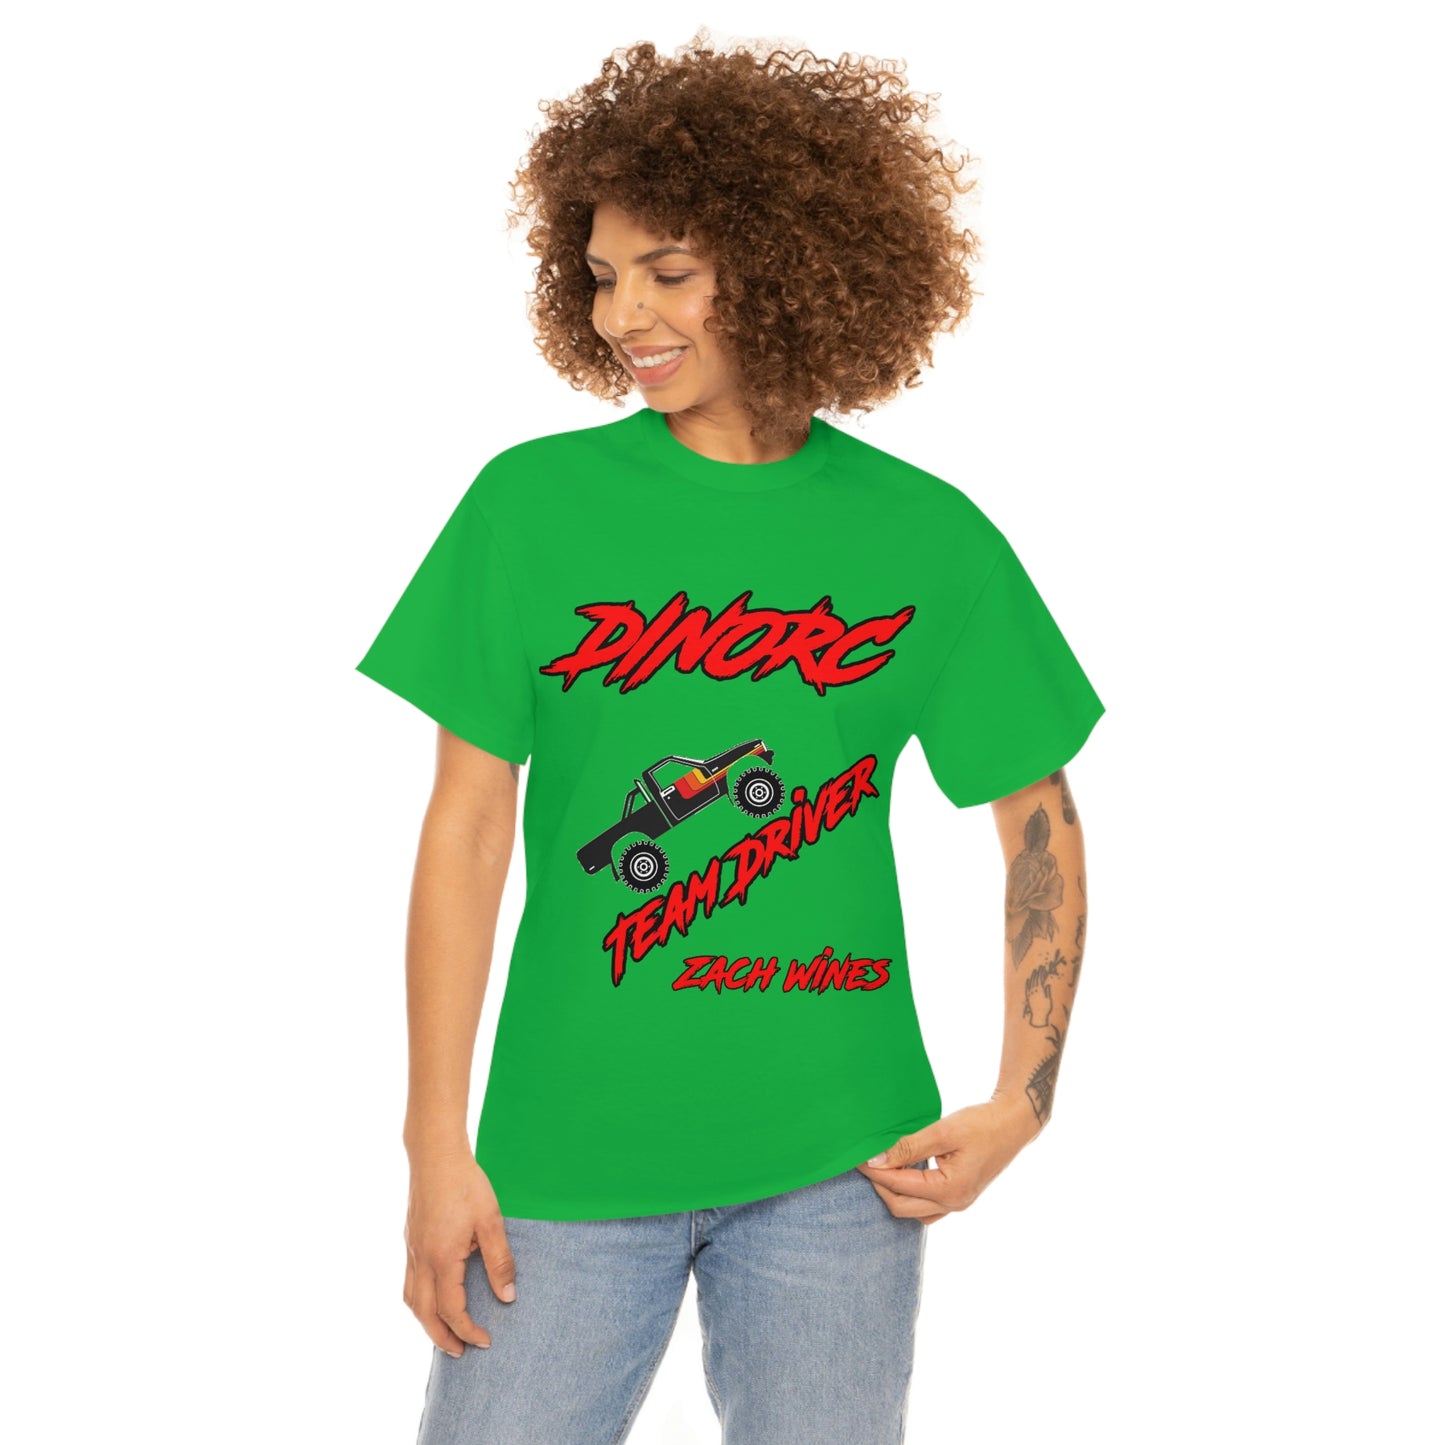 Zach Wines  DinoRC Team Driver truck logo Front and Back DinoRc Logo T-Shirt S-5x 5 colors